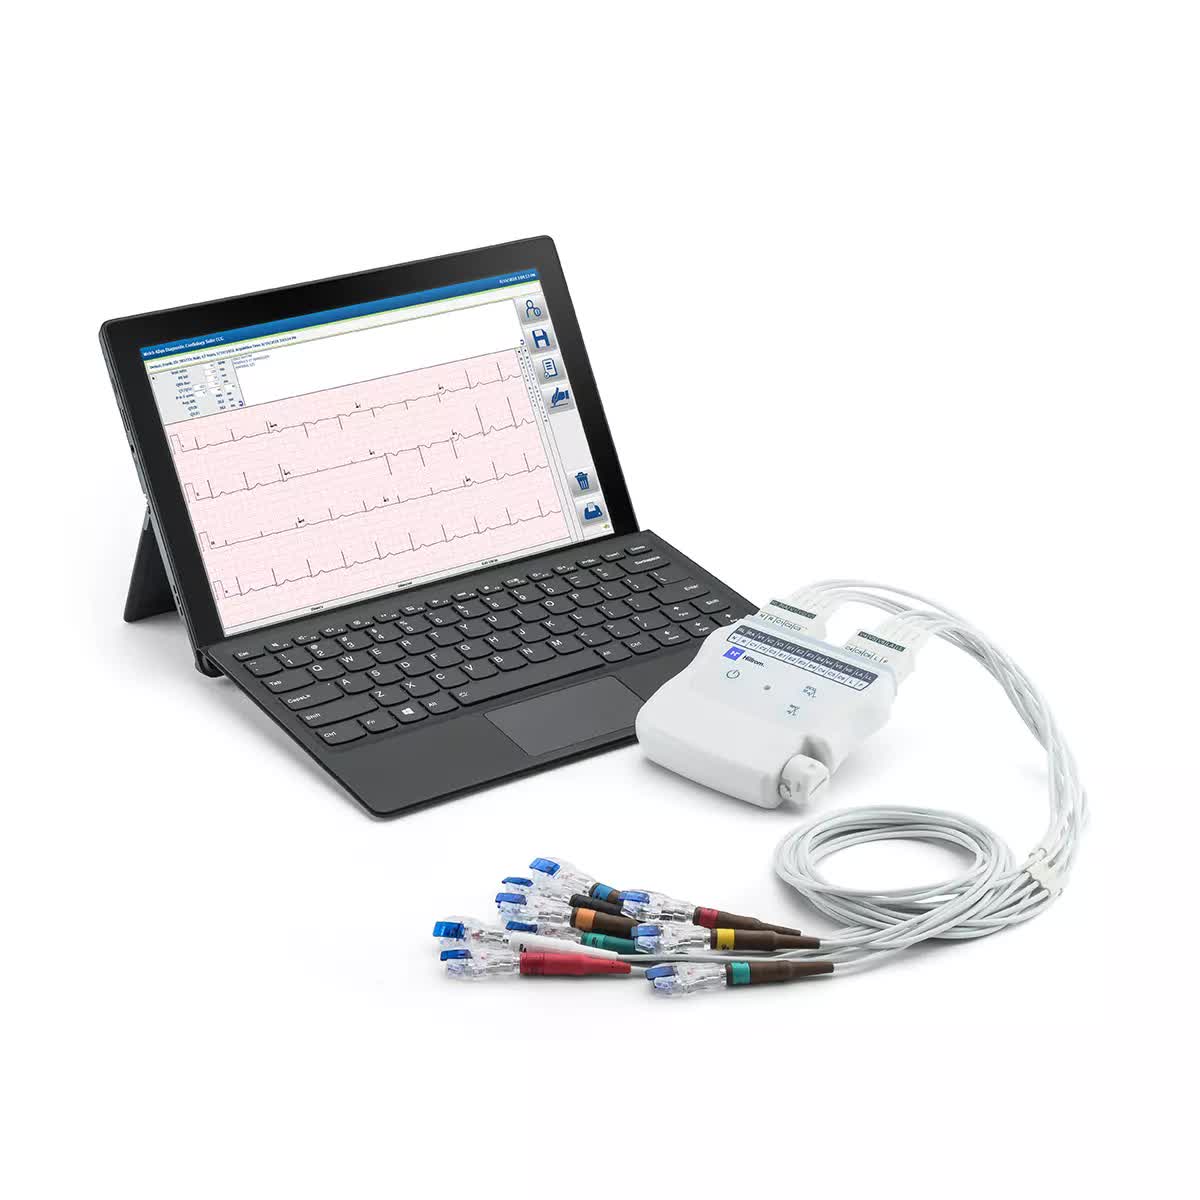 Welch Allyn Connex Diagnostic Cardiology Suite ECG Software with Cardio AM12 Patient Cable and DICOM Connectivity